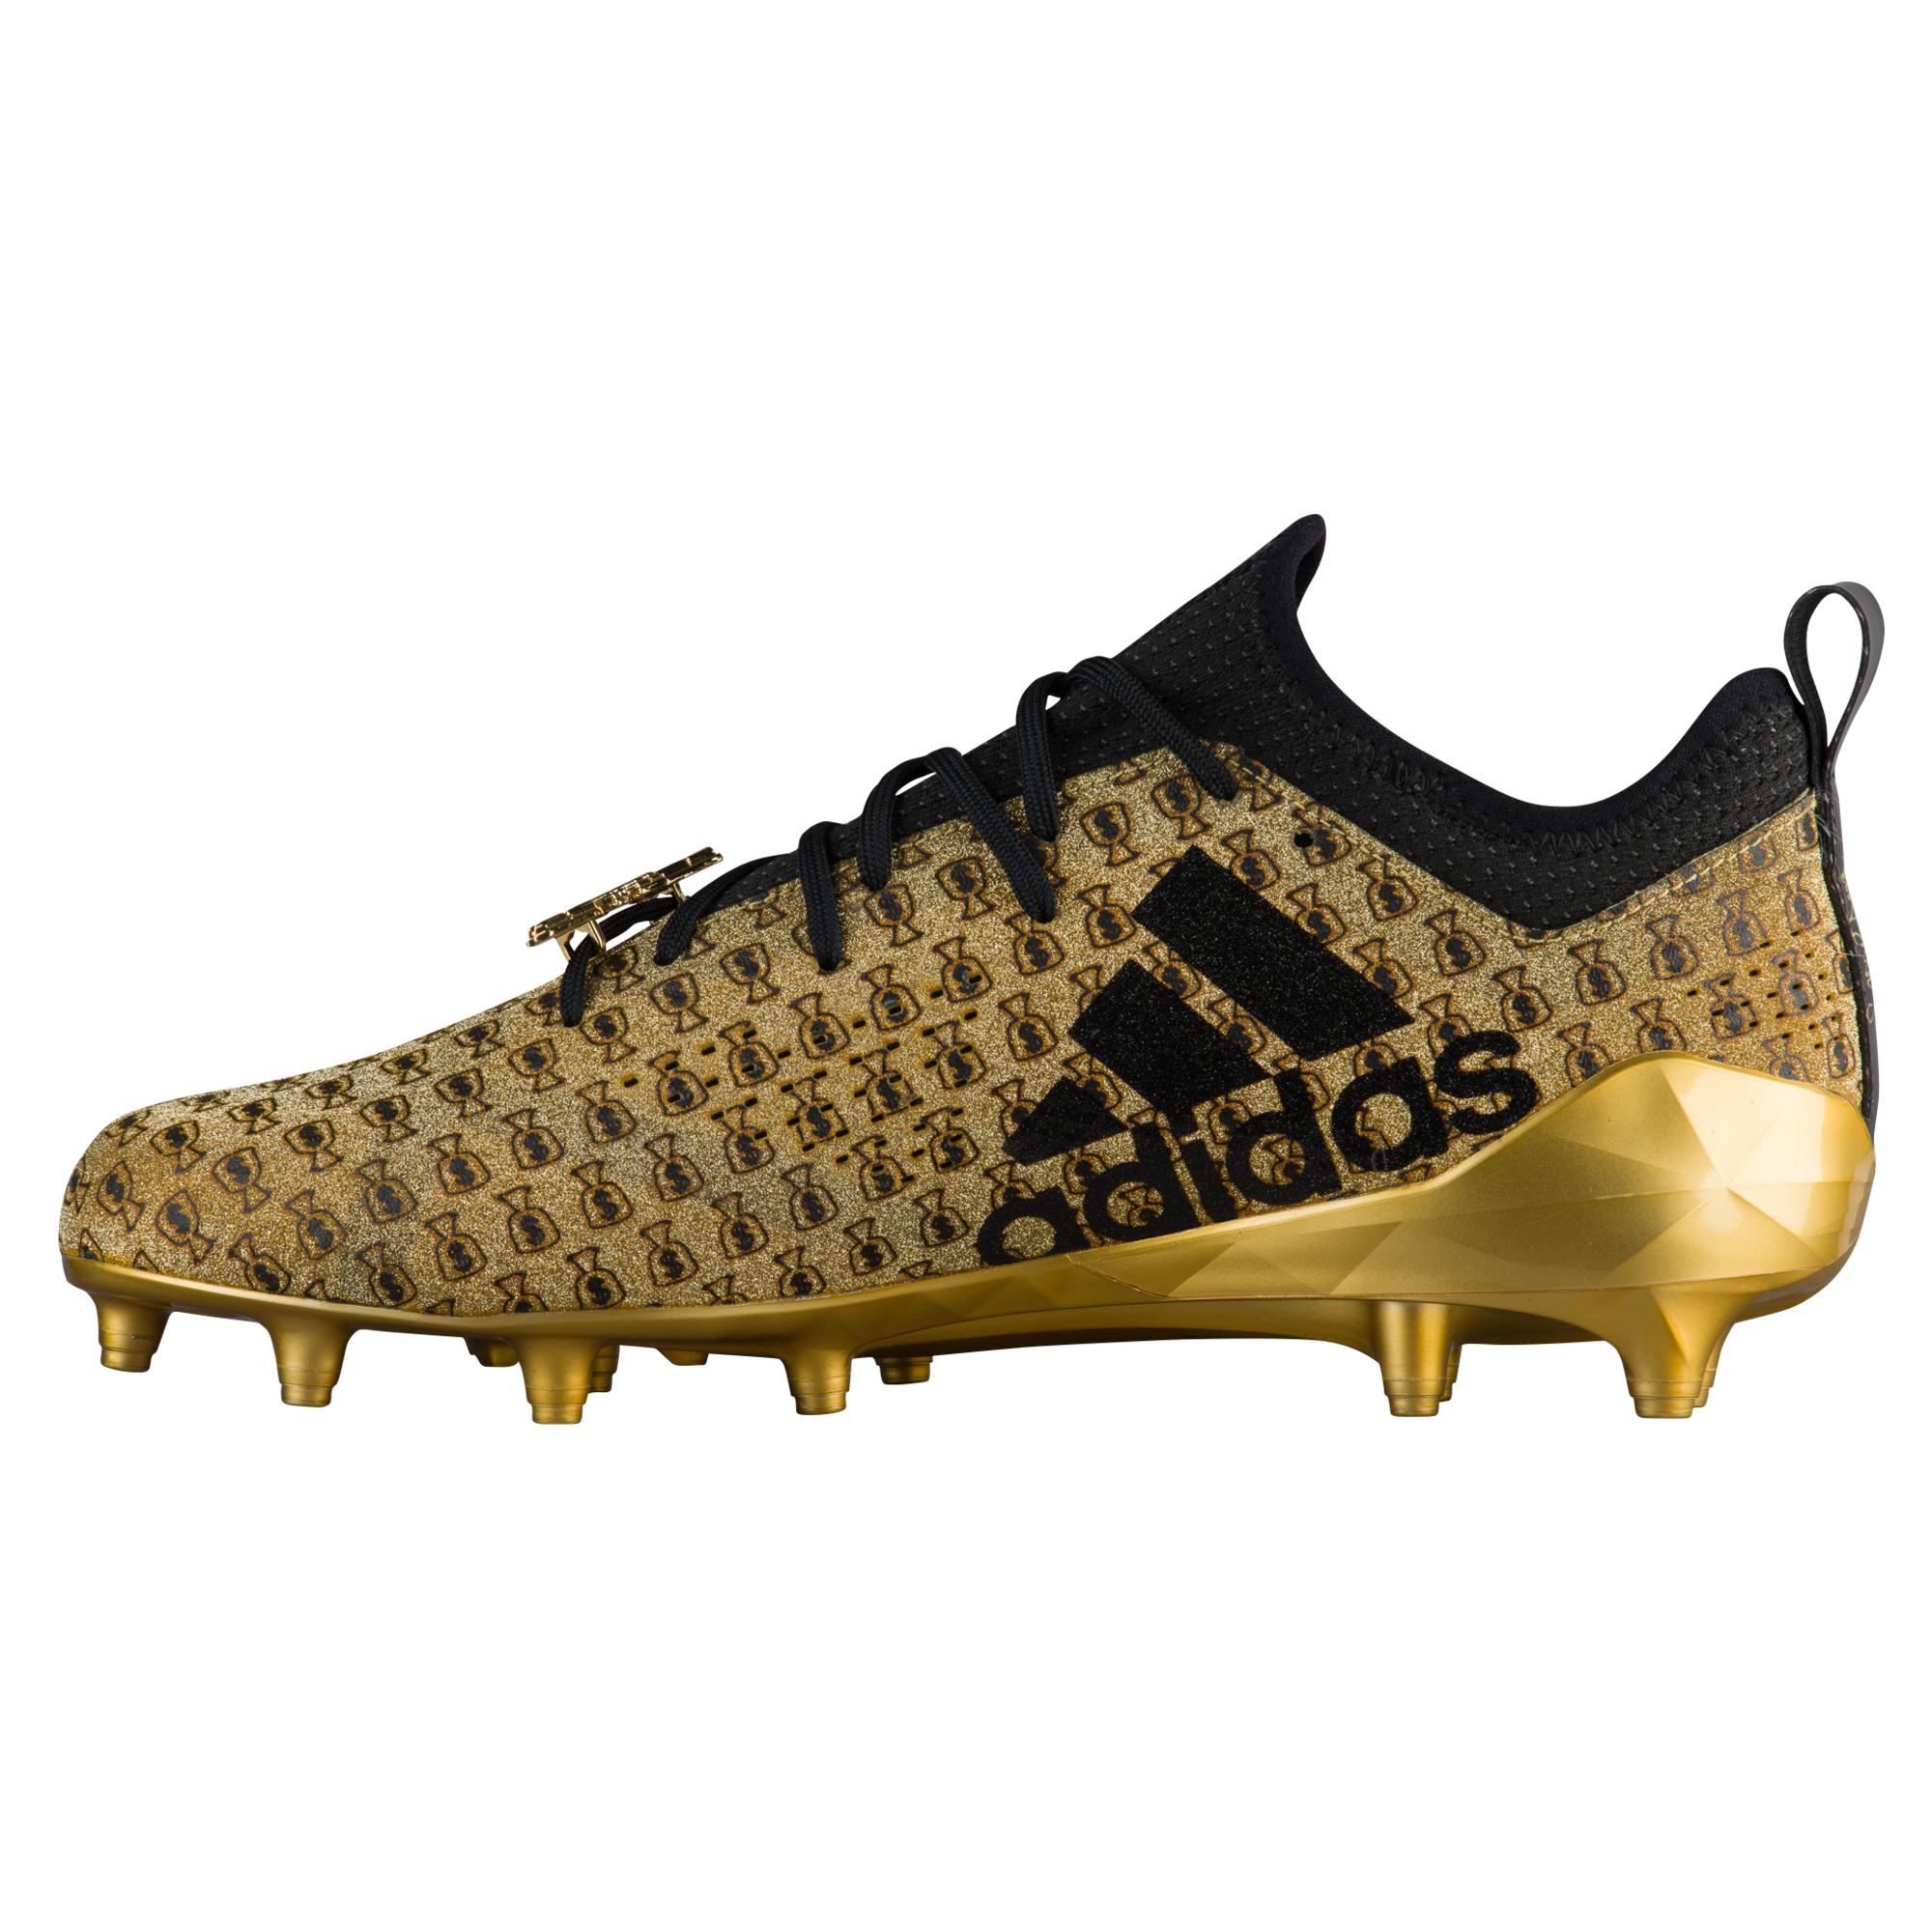 adimoji cleats, enormous deal 83% off - statehouse.gov.sl